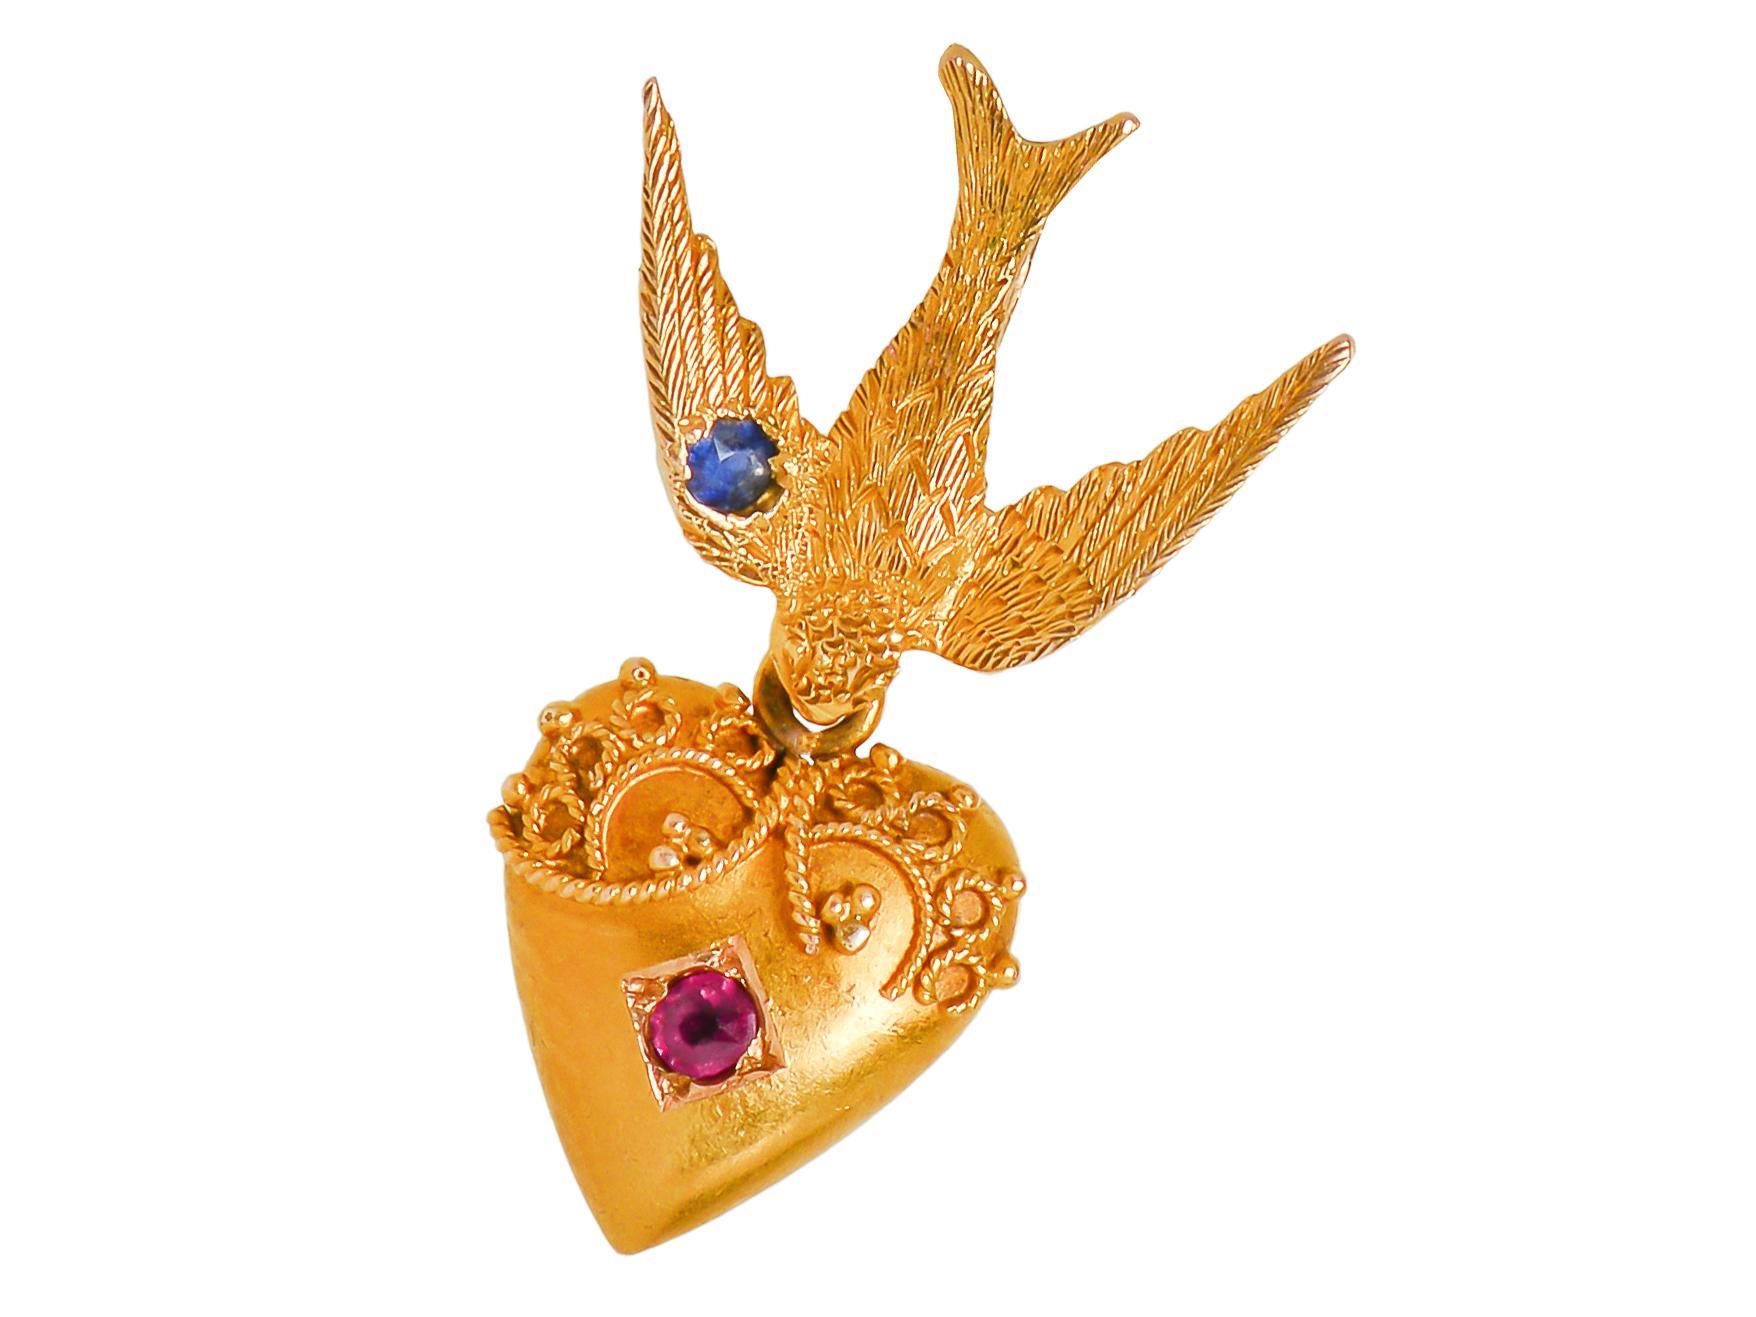 In 18 Kt gold set with a ruby and a sapphire this pendant is reminiscent of Shakespeare's poem 